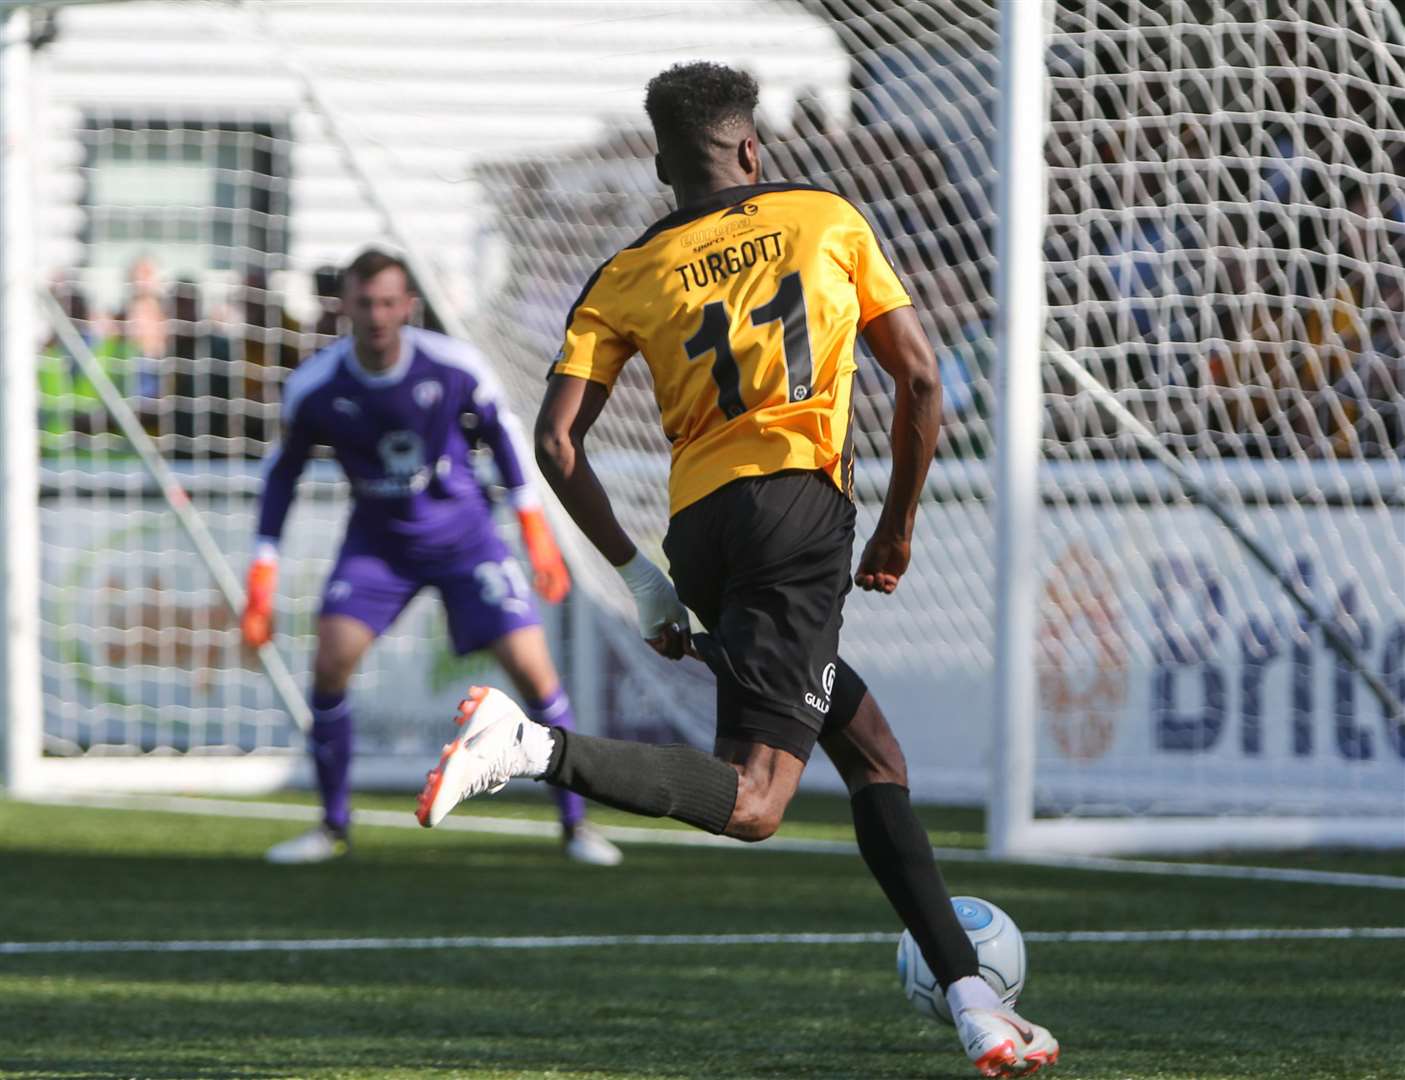 Blair Turgott has the Chesterfield goal in his sights Picture: Matthew Walker